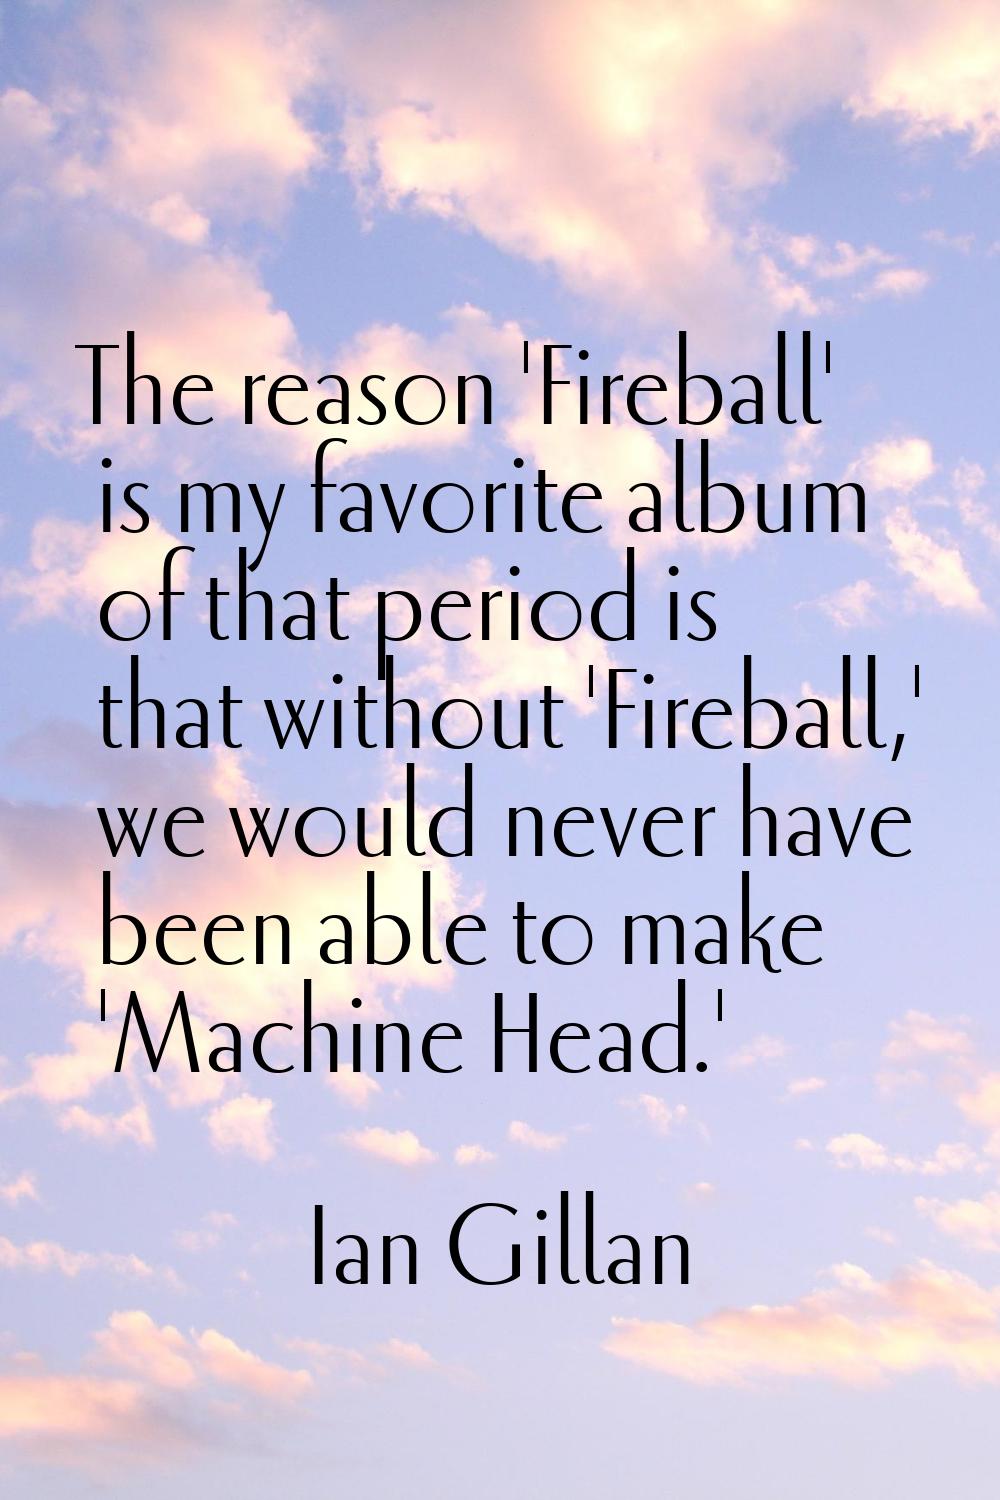 The reason 'Fireball' is my favorite album of that period is that without 'Fireball,' we would neve